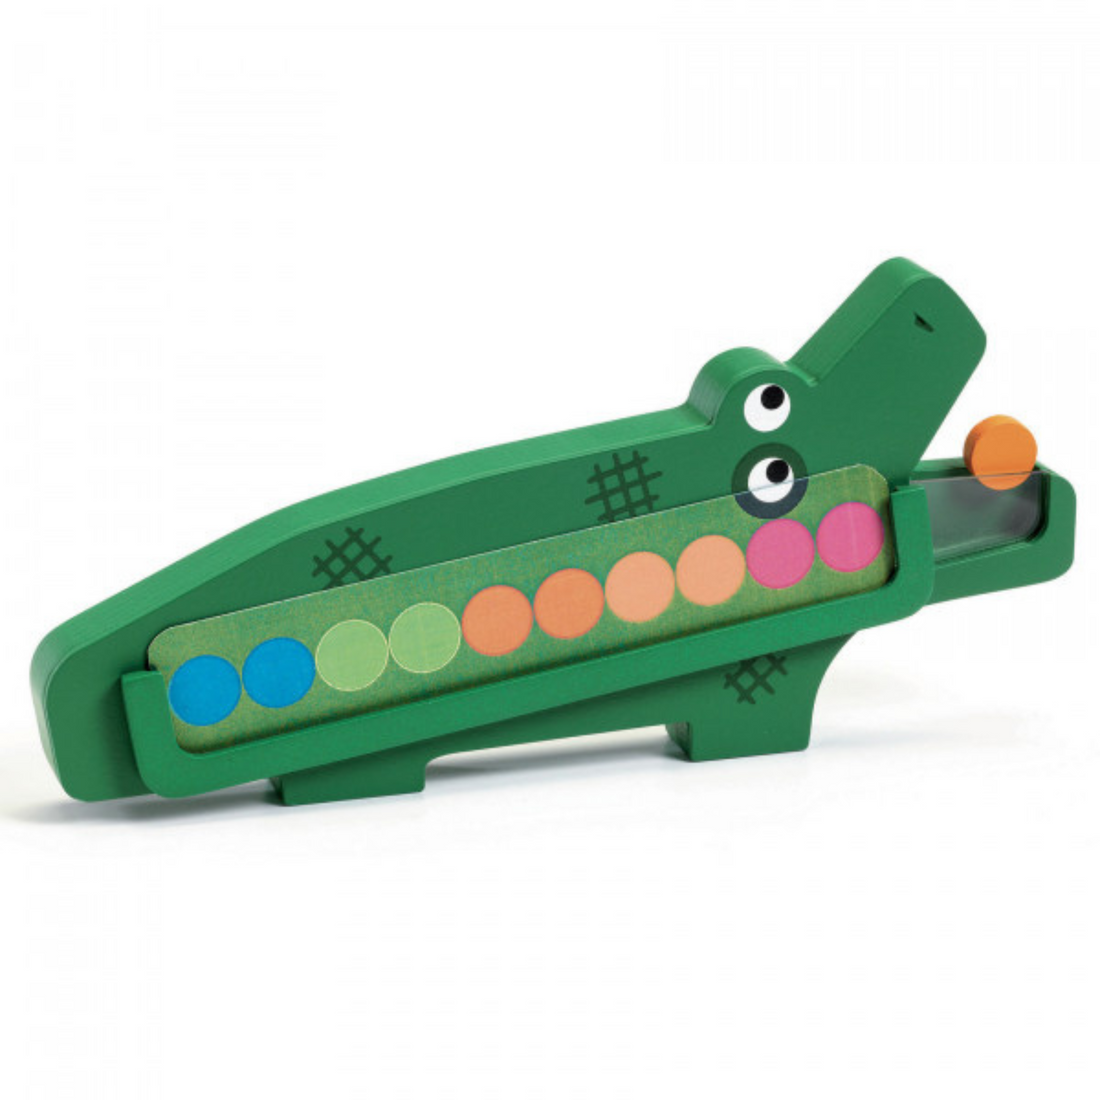 Educational wooden game - Crococroc